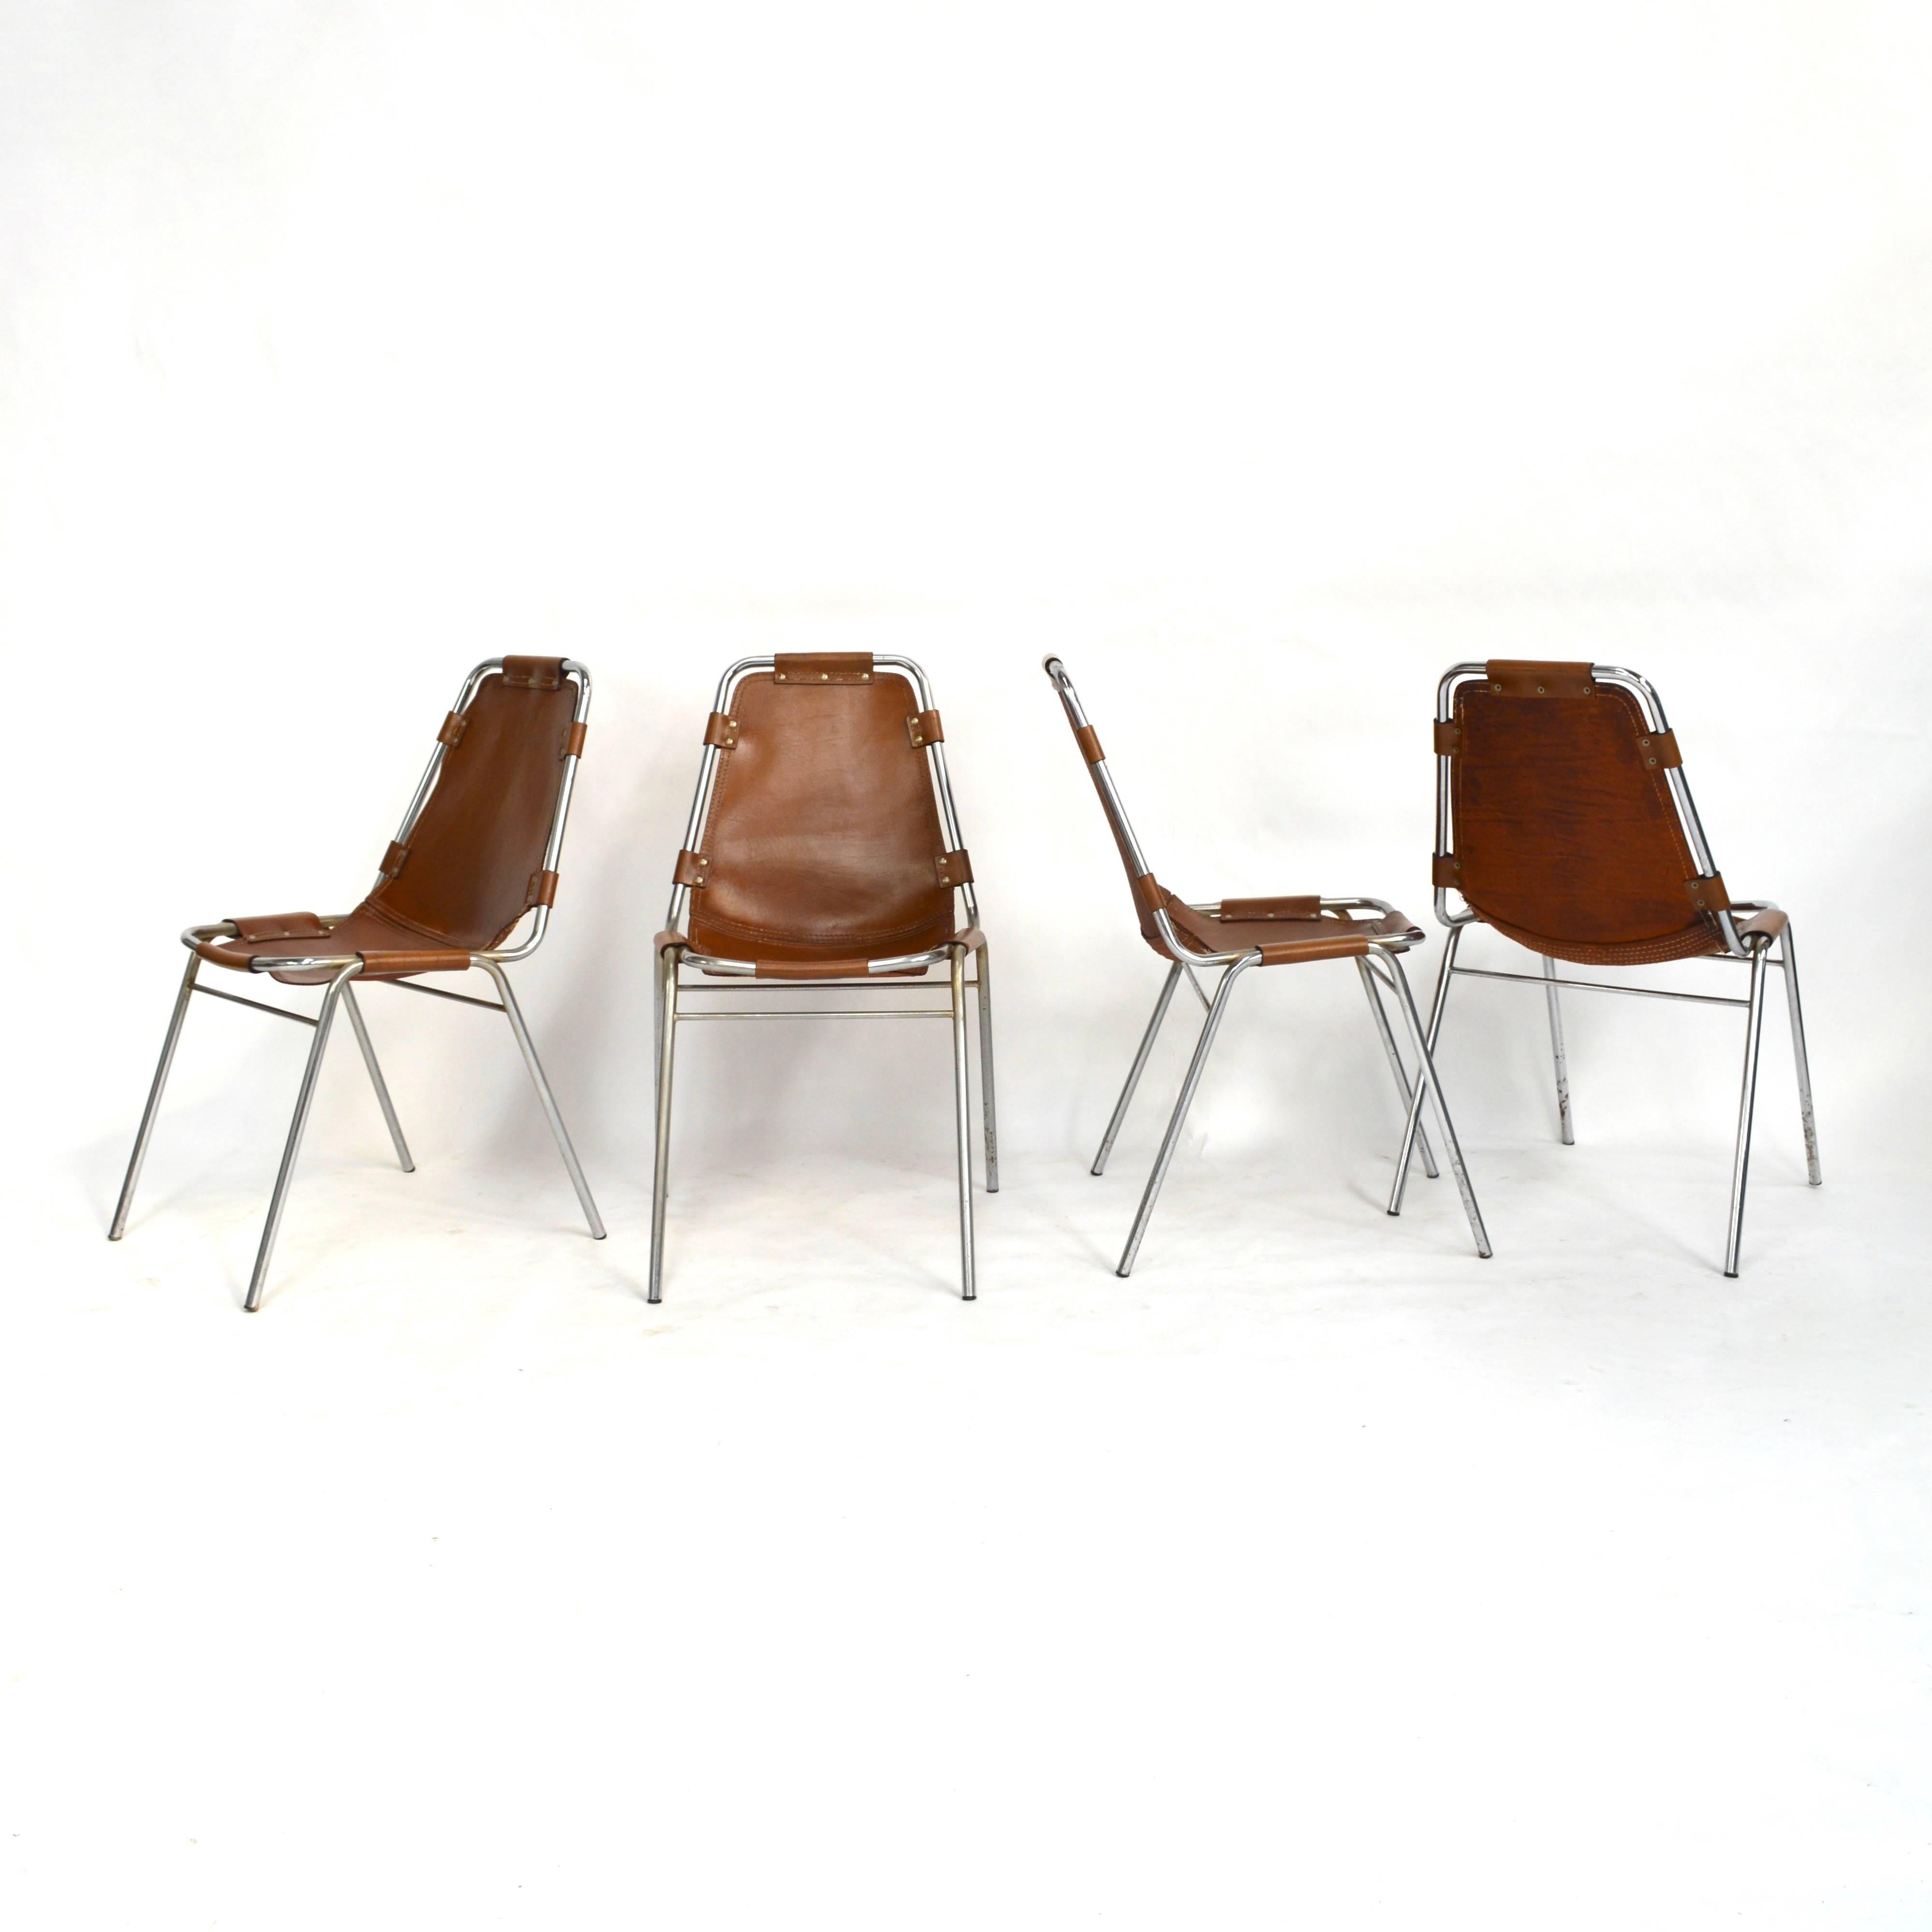 Set of four original 'Les Arcs' chairs by Charlotte Perriand from 1973.
Chrome tubular base with cognac saddle leather.
Overall very nice patina.
Stamped 14 MAR. 1973.

Date of design: 1950s

Date of manufacture: 1973 (the leather has dates